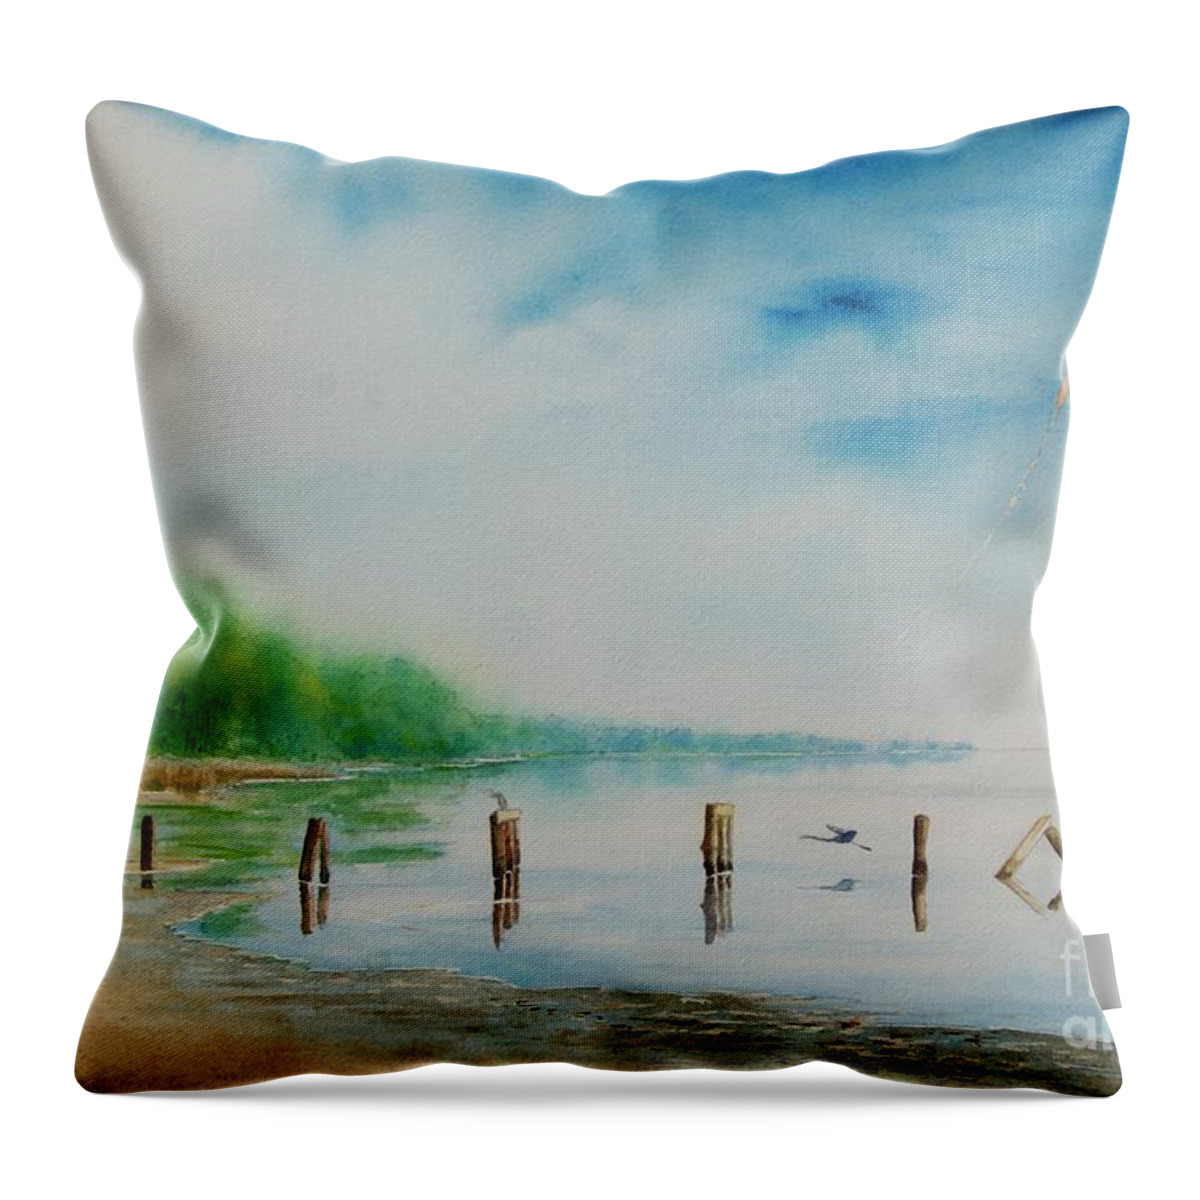 Banana River Throw Pillow featuring the painting Twin Launch by AnnaJo Vahle